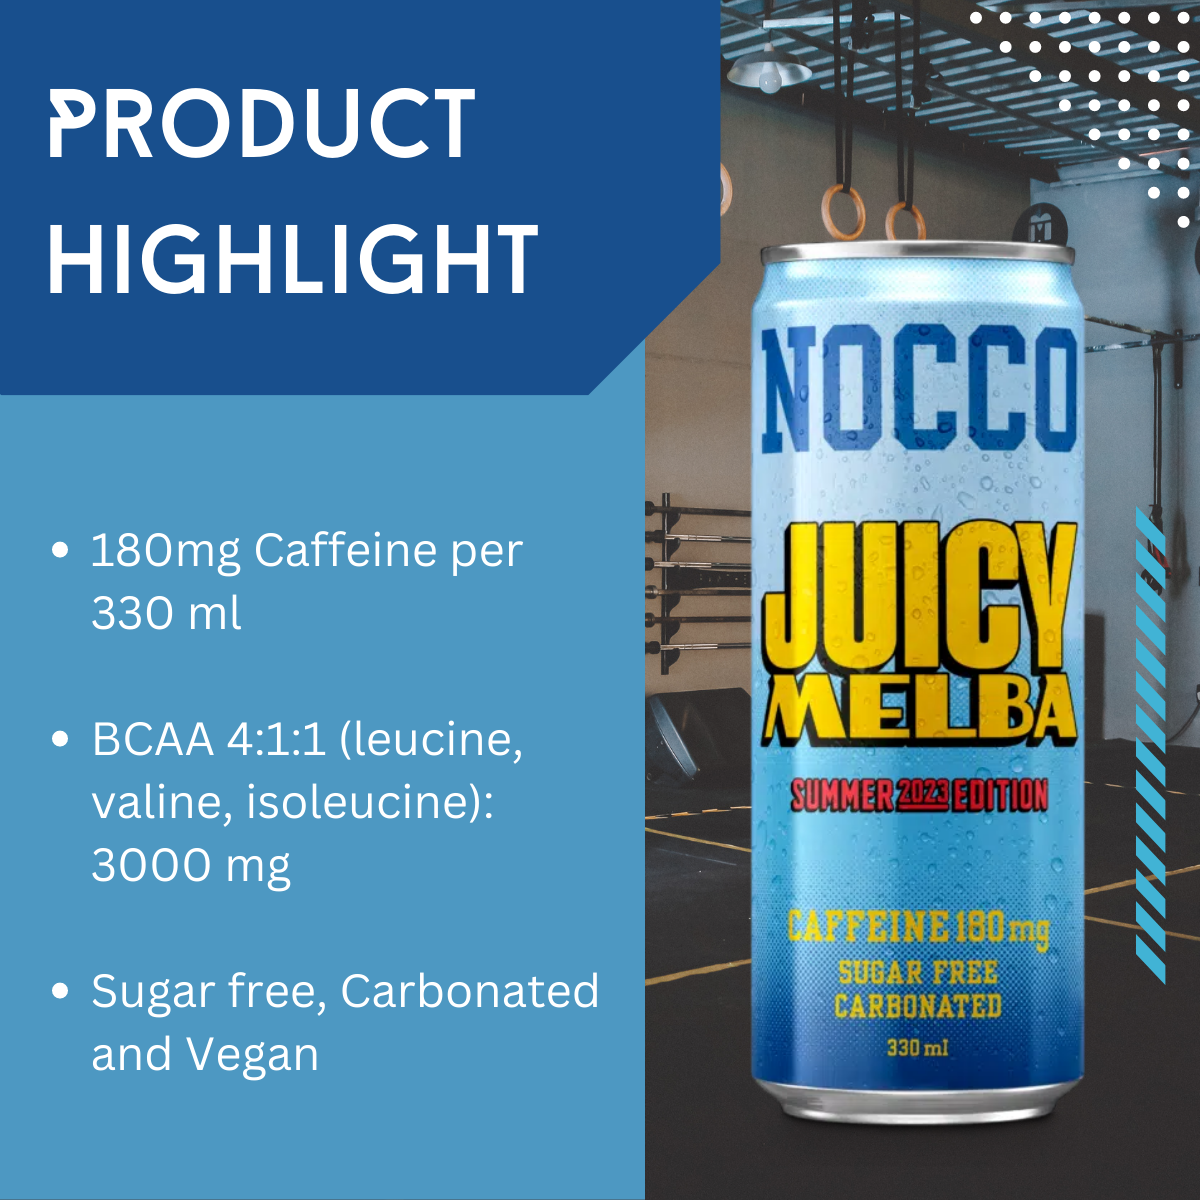 Nocco, Energy Drink, 330ml, 6-24 Cans - highlight